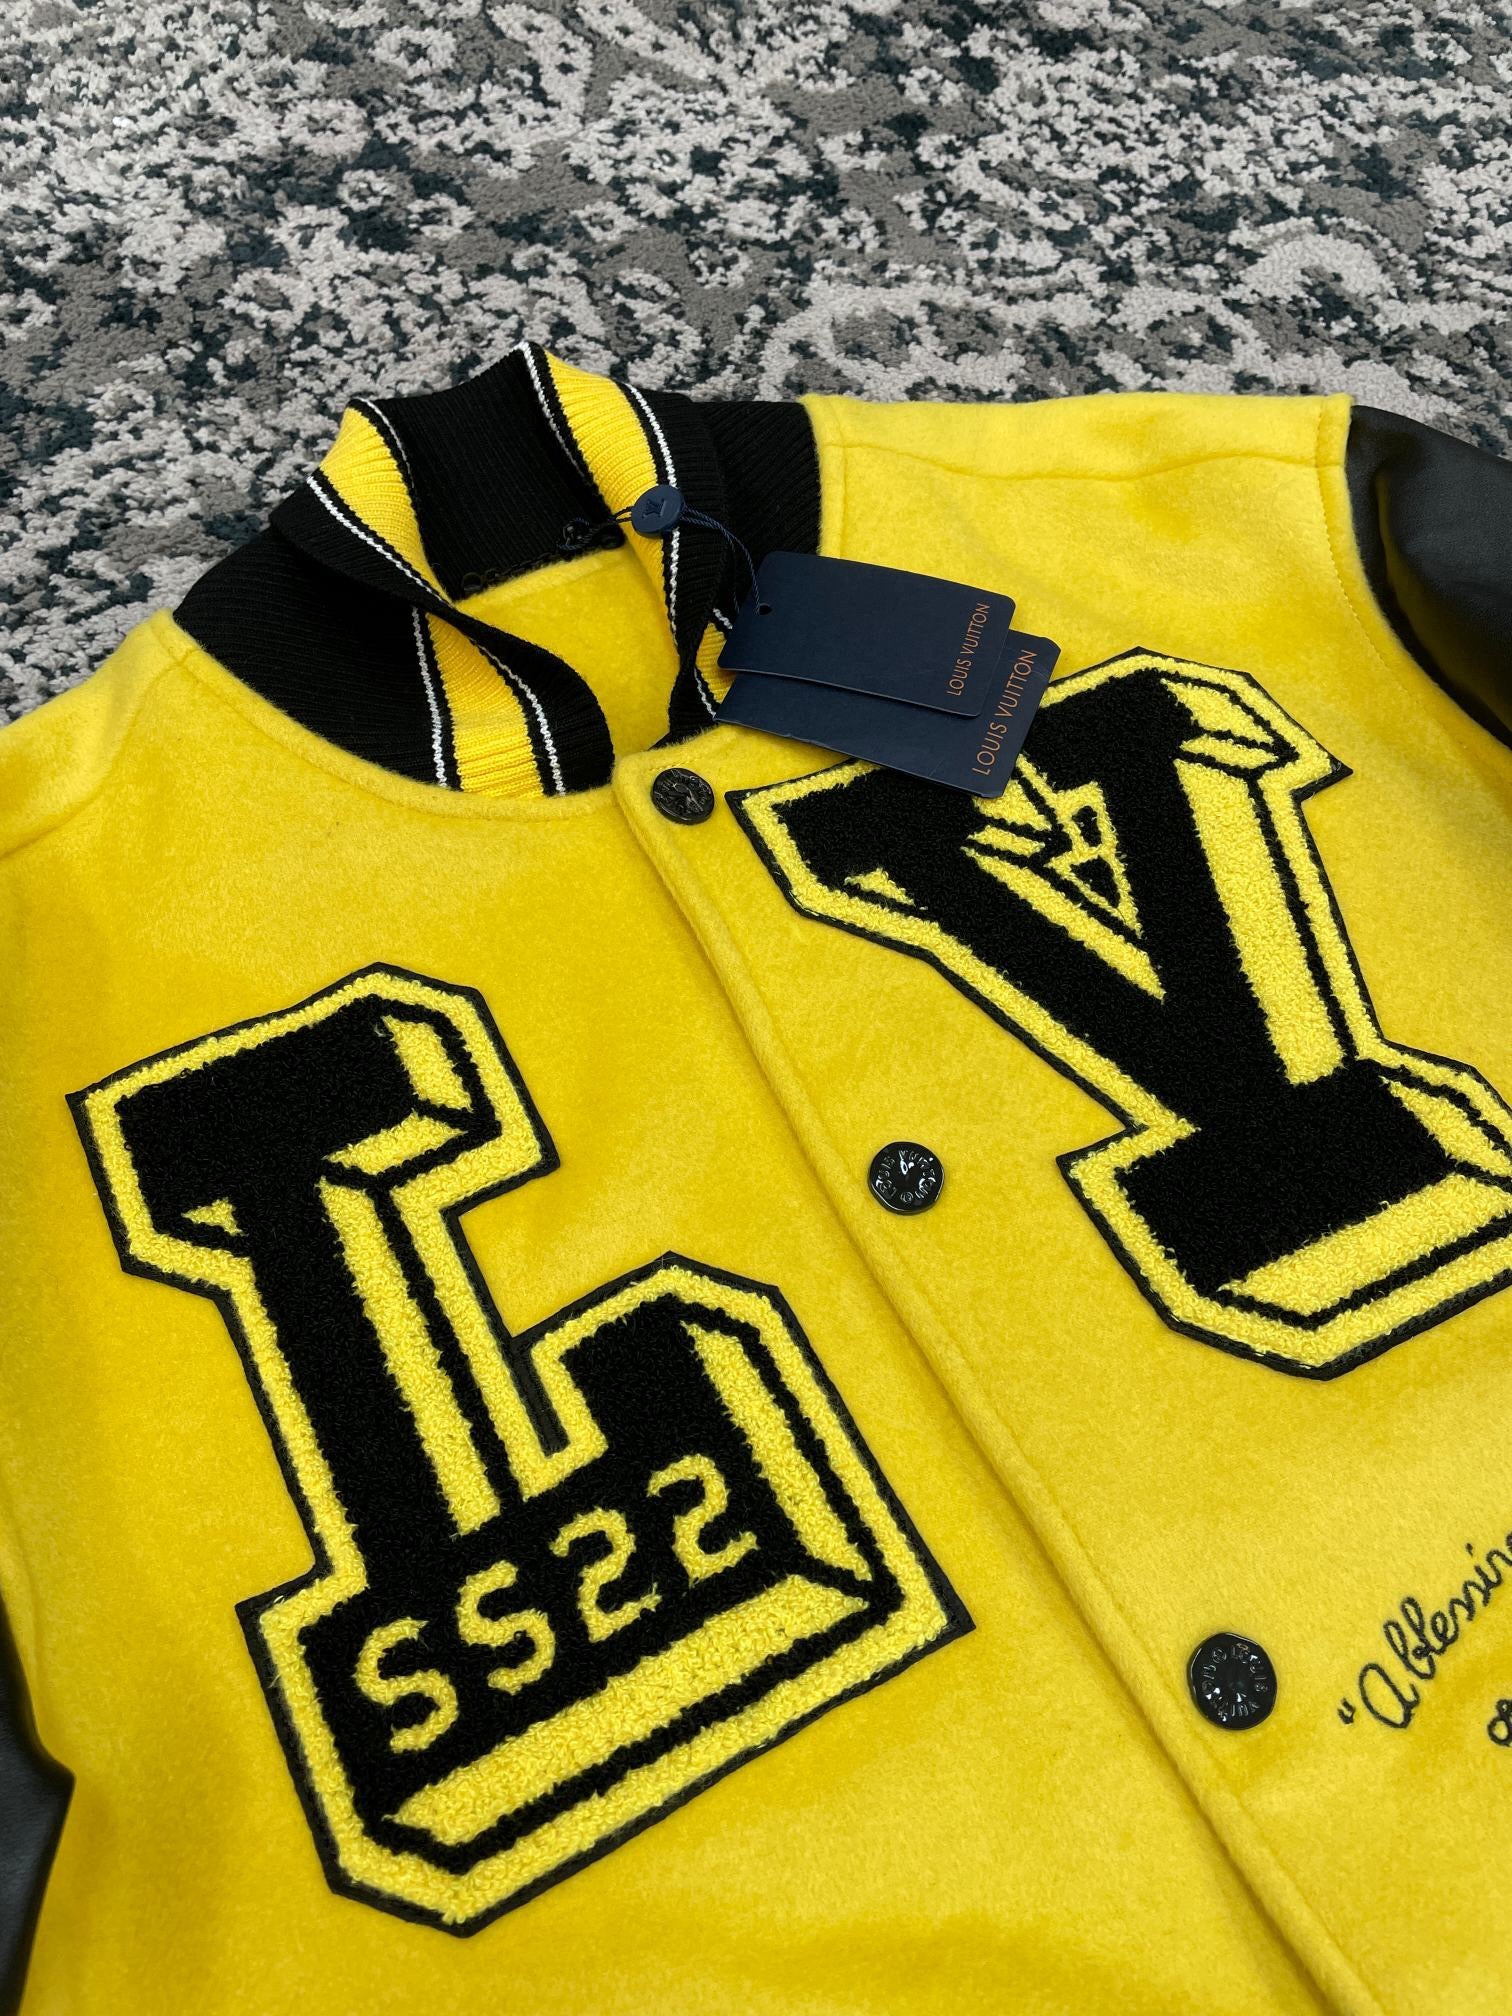 Yellow and black Jackets